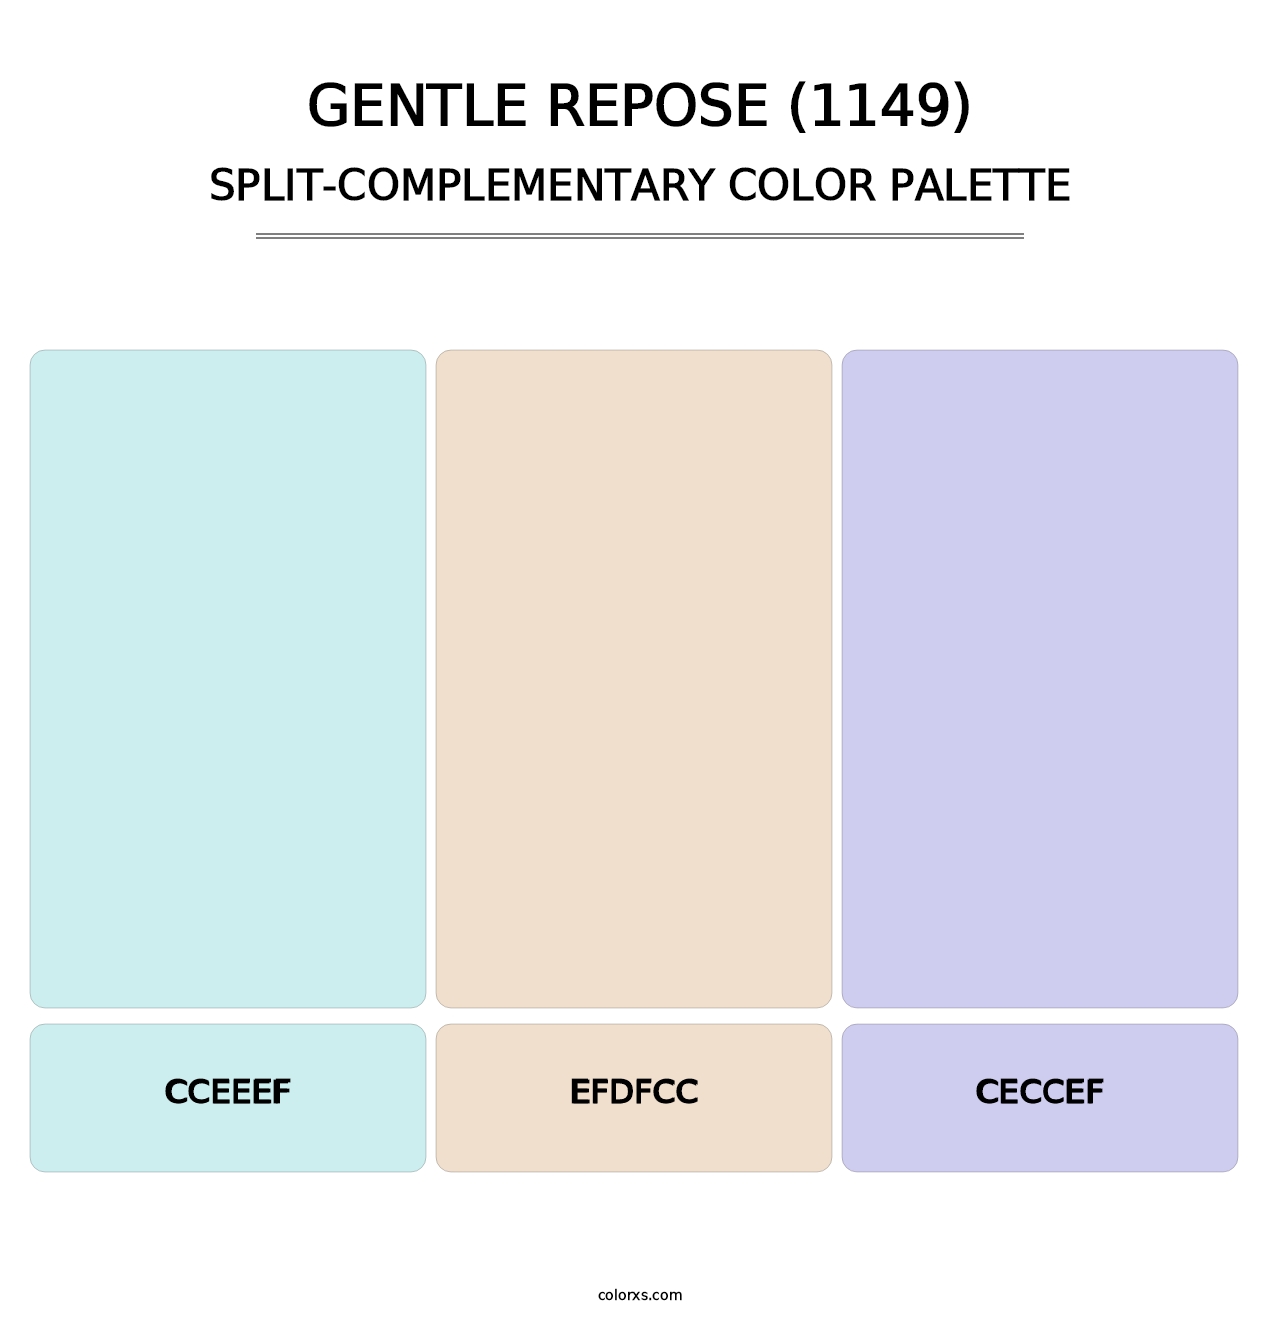 Gentle Repose (1149) - Split-Complementary Color Palette